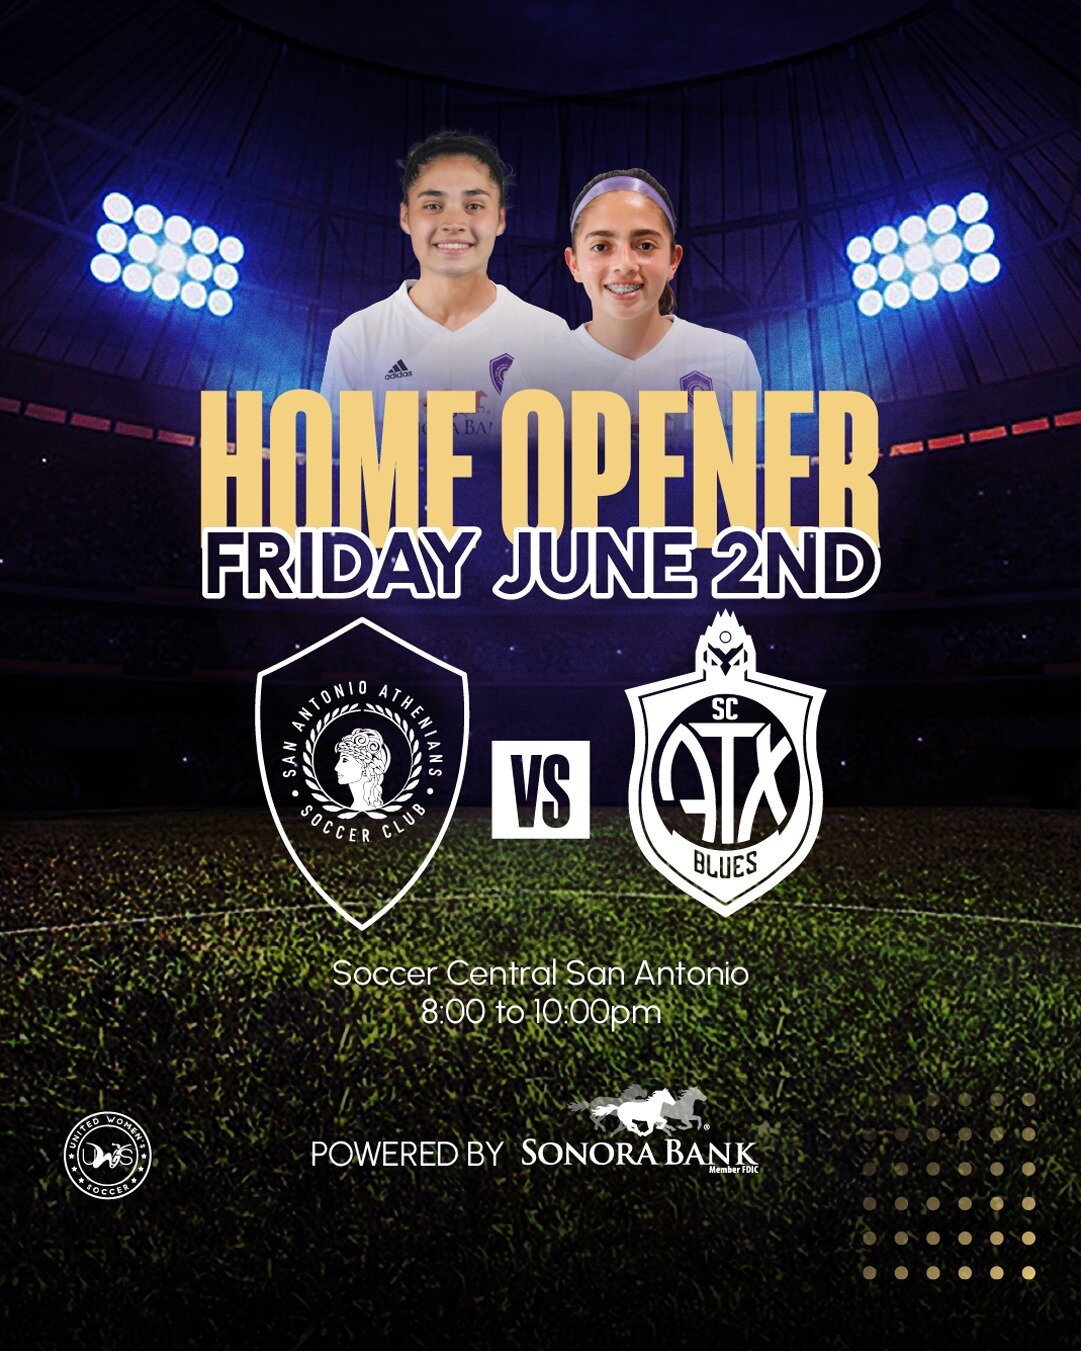 📣 It's finally here! The San Antonio Athenians' home opener game is happening TONIGHT at 8pm at Soccer Central San Antonio against the ATX Blues! 🔥

Get ready for a thrilling match and an exciting season ahead! 💪🏽

Good luck to all our players, c